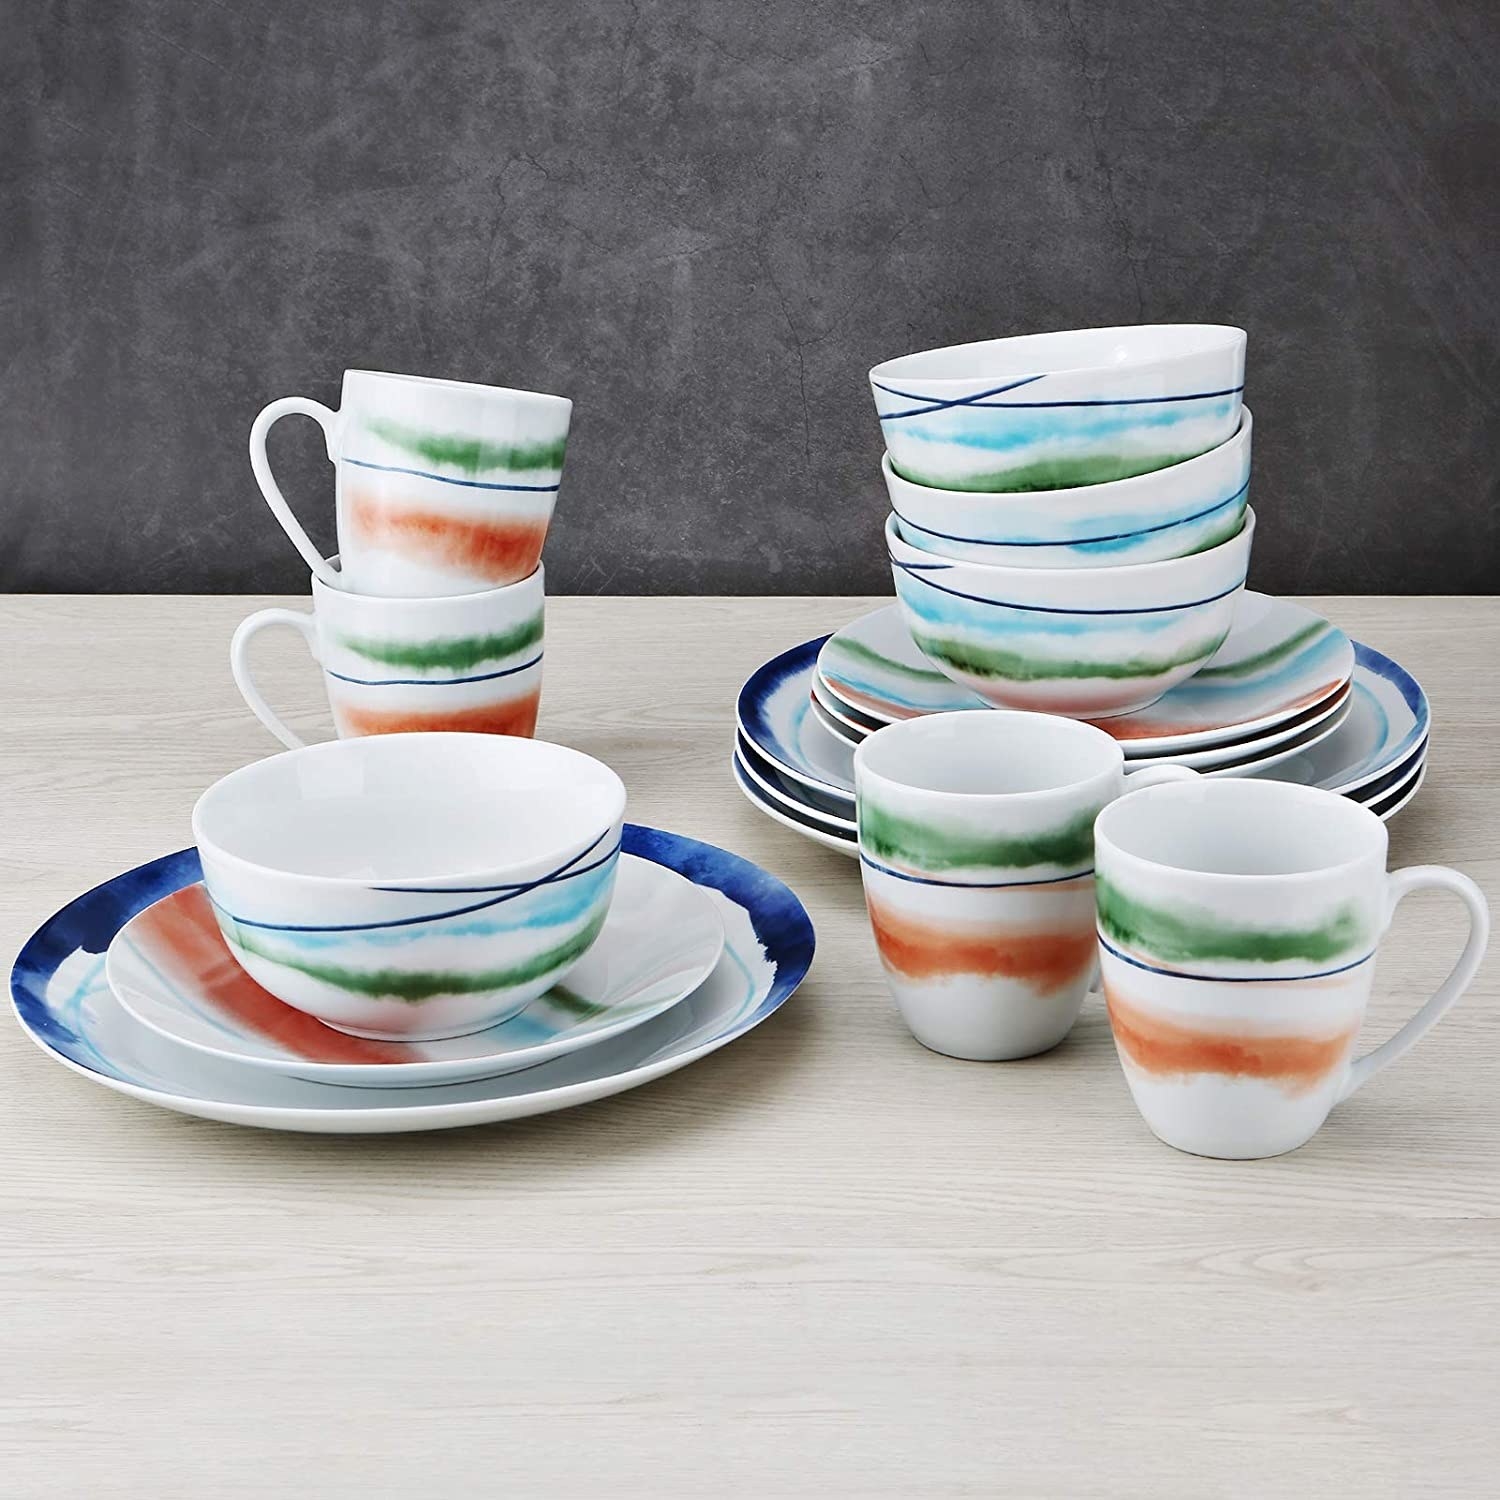 the zyan white fusion dinnerware set stacked on a table